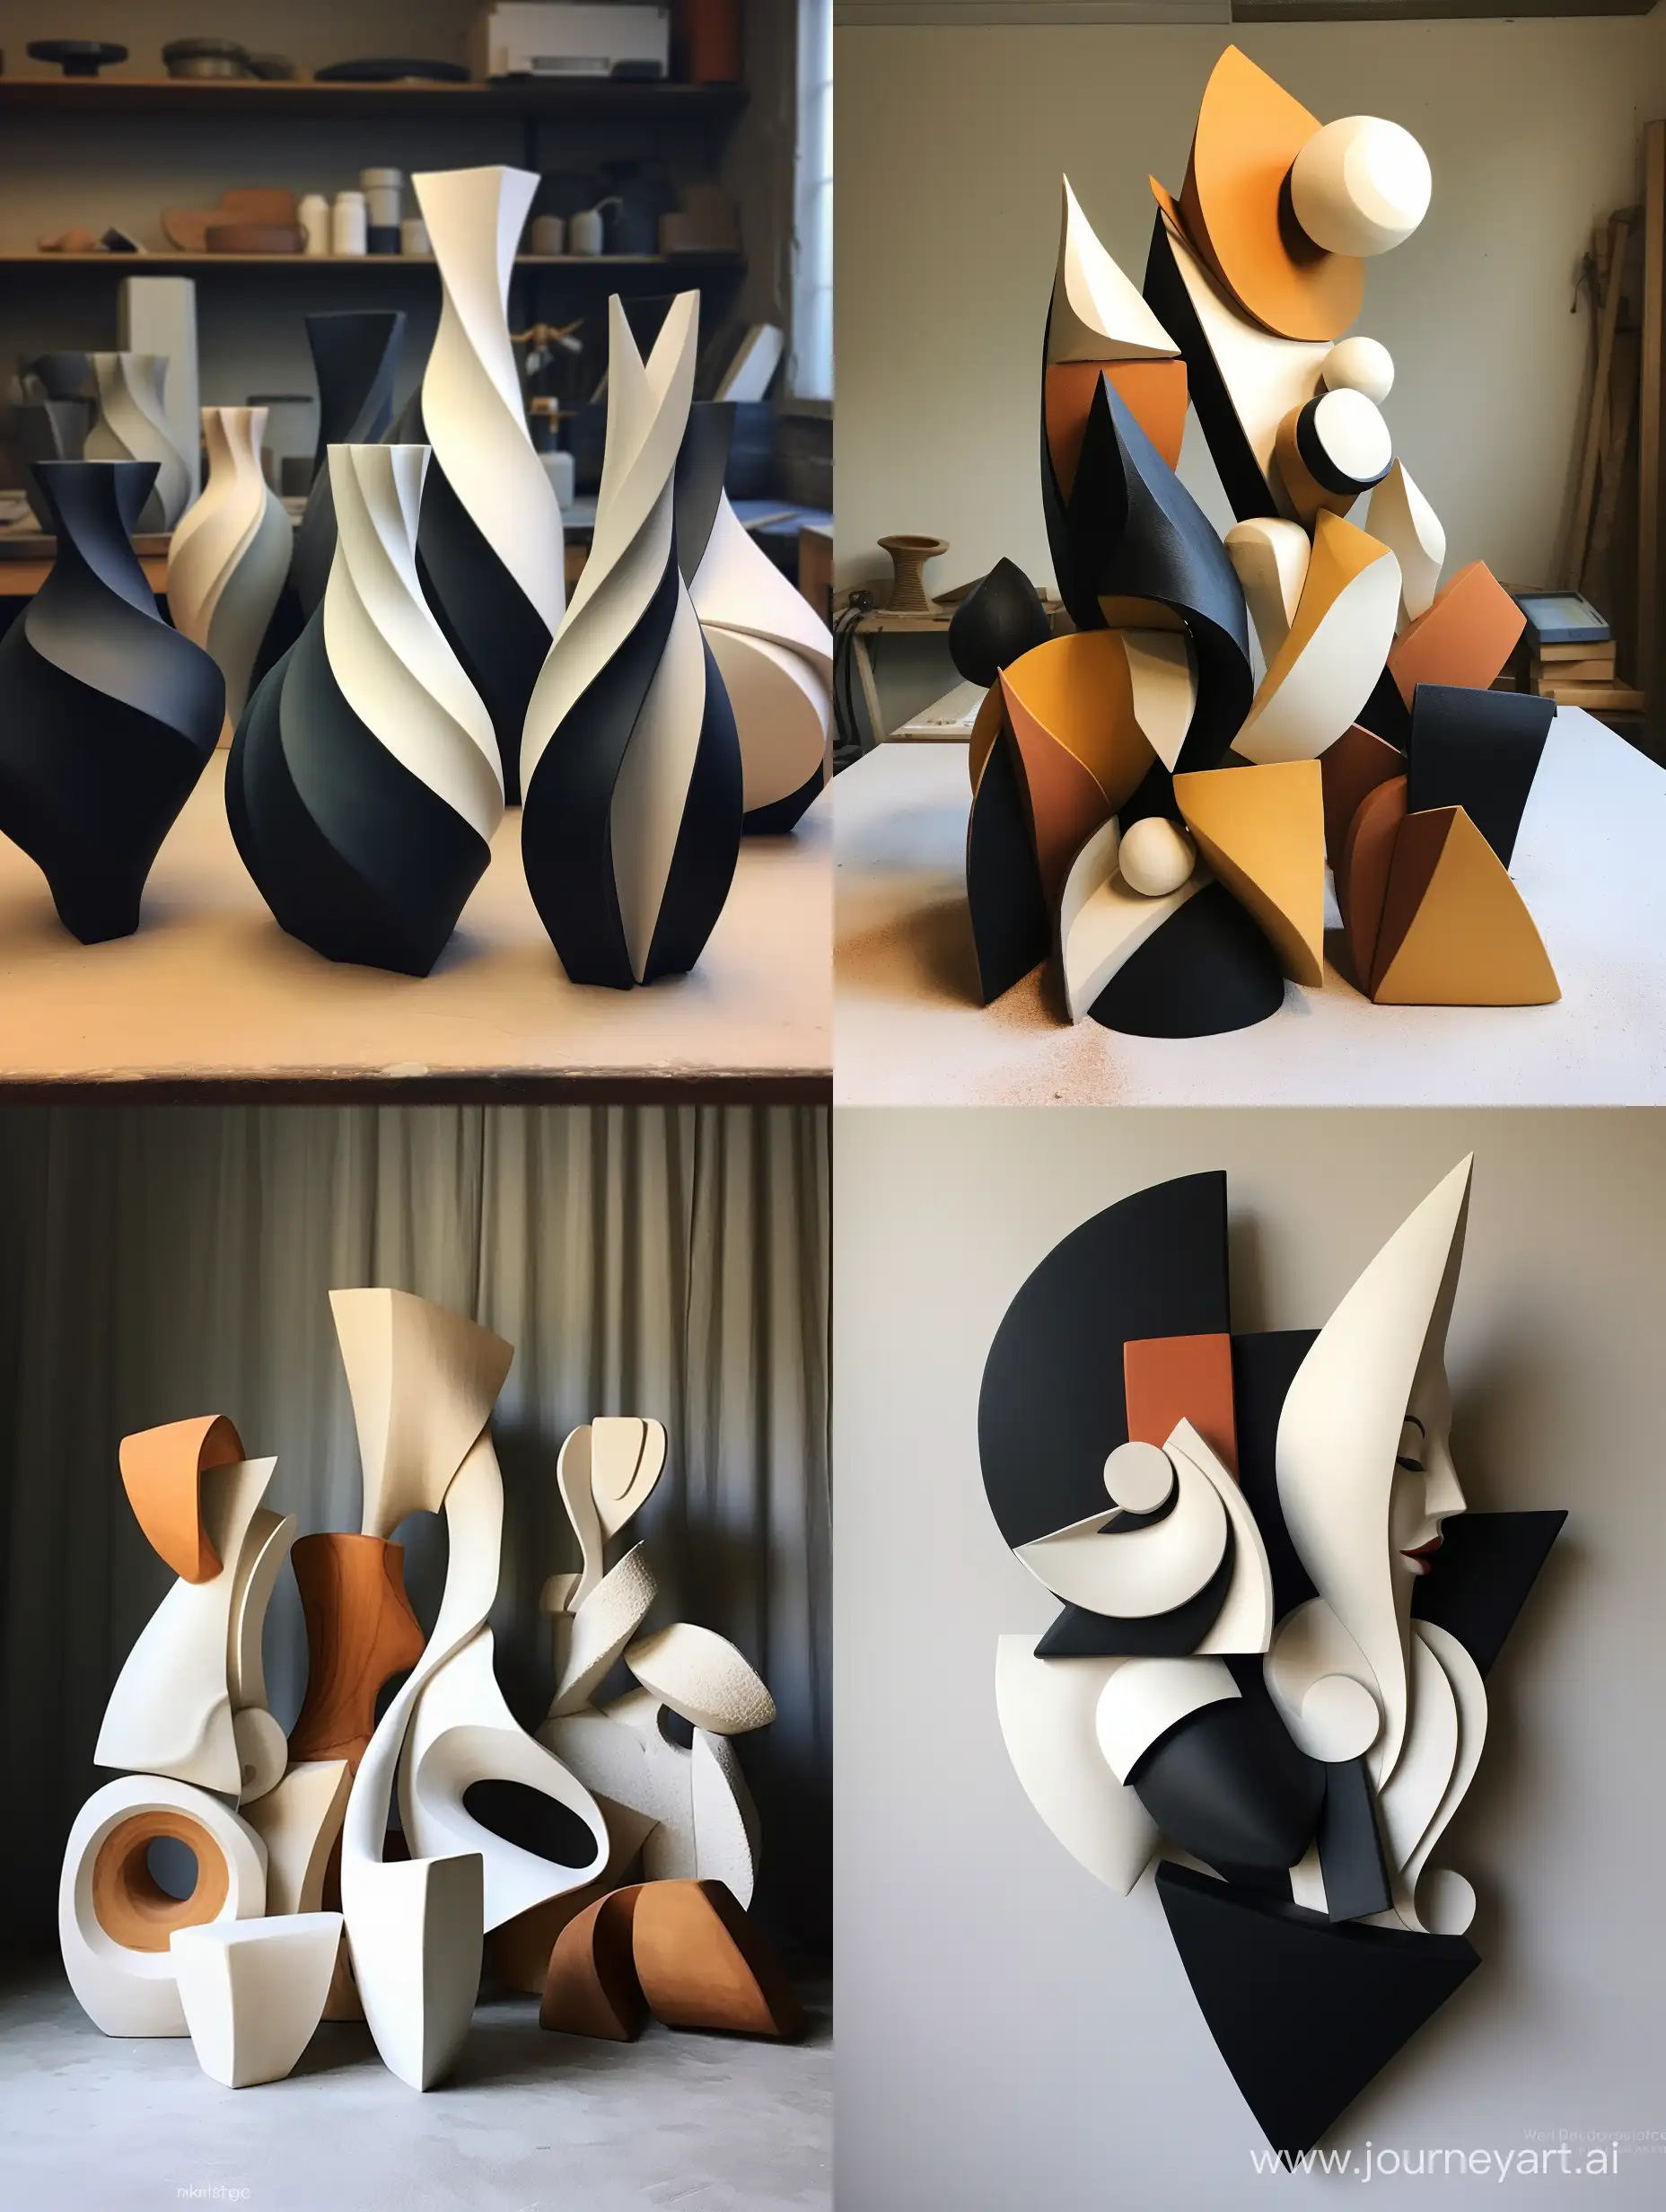 Geometric-Ceramic-Sculpture-Abstract-Forms-in-60s-Style